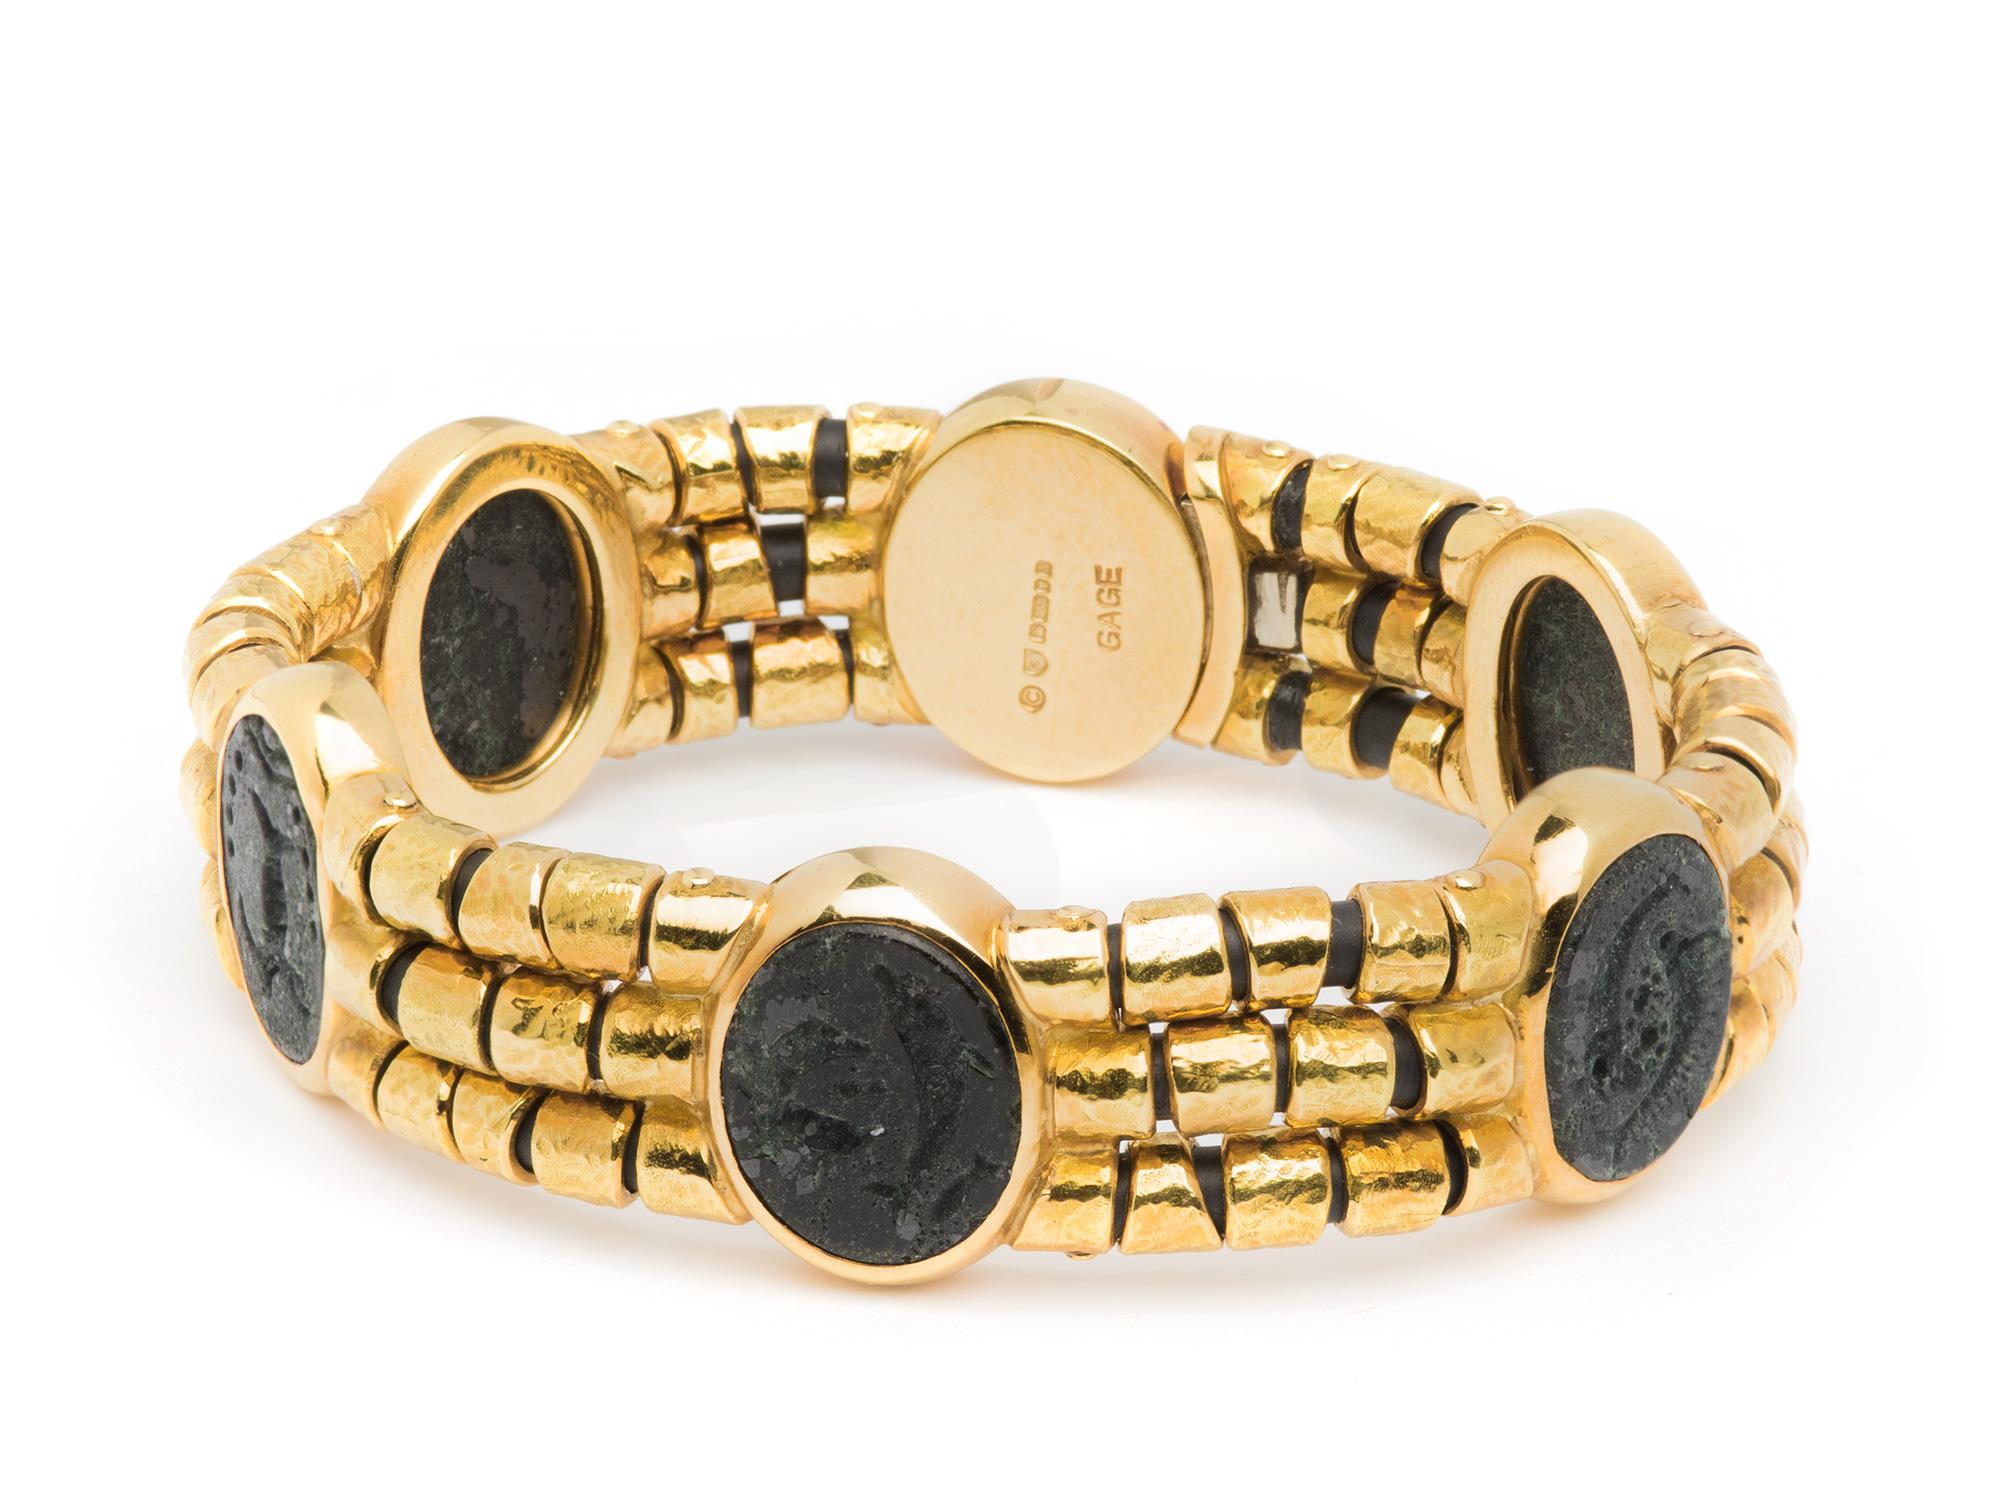 Elizabeth Gage Bracelet with (6) Oval Marine Motifs made out of porous hardstone set with (3) rows of hammered gold barrels on flexible cord.  Signed Gage, British Hallmarks, 18k, Circa 2000.